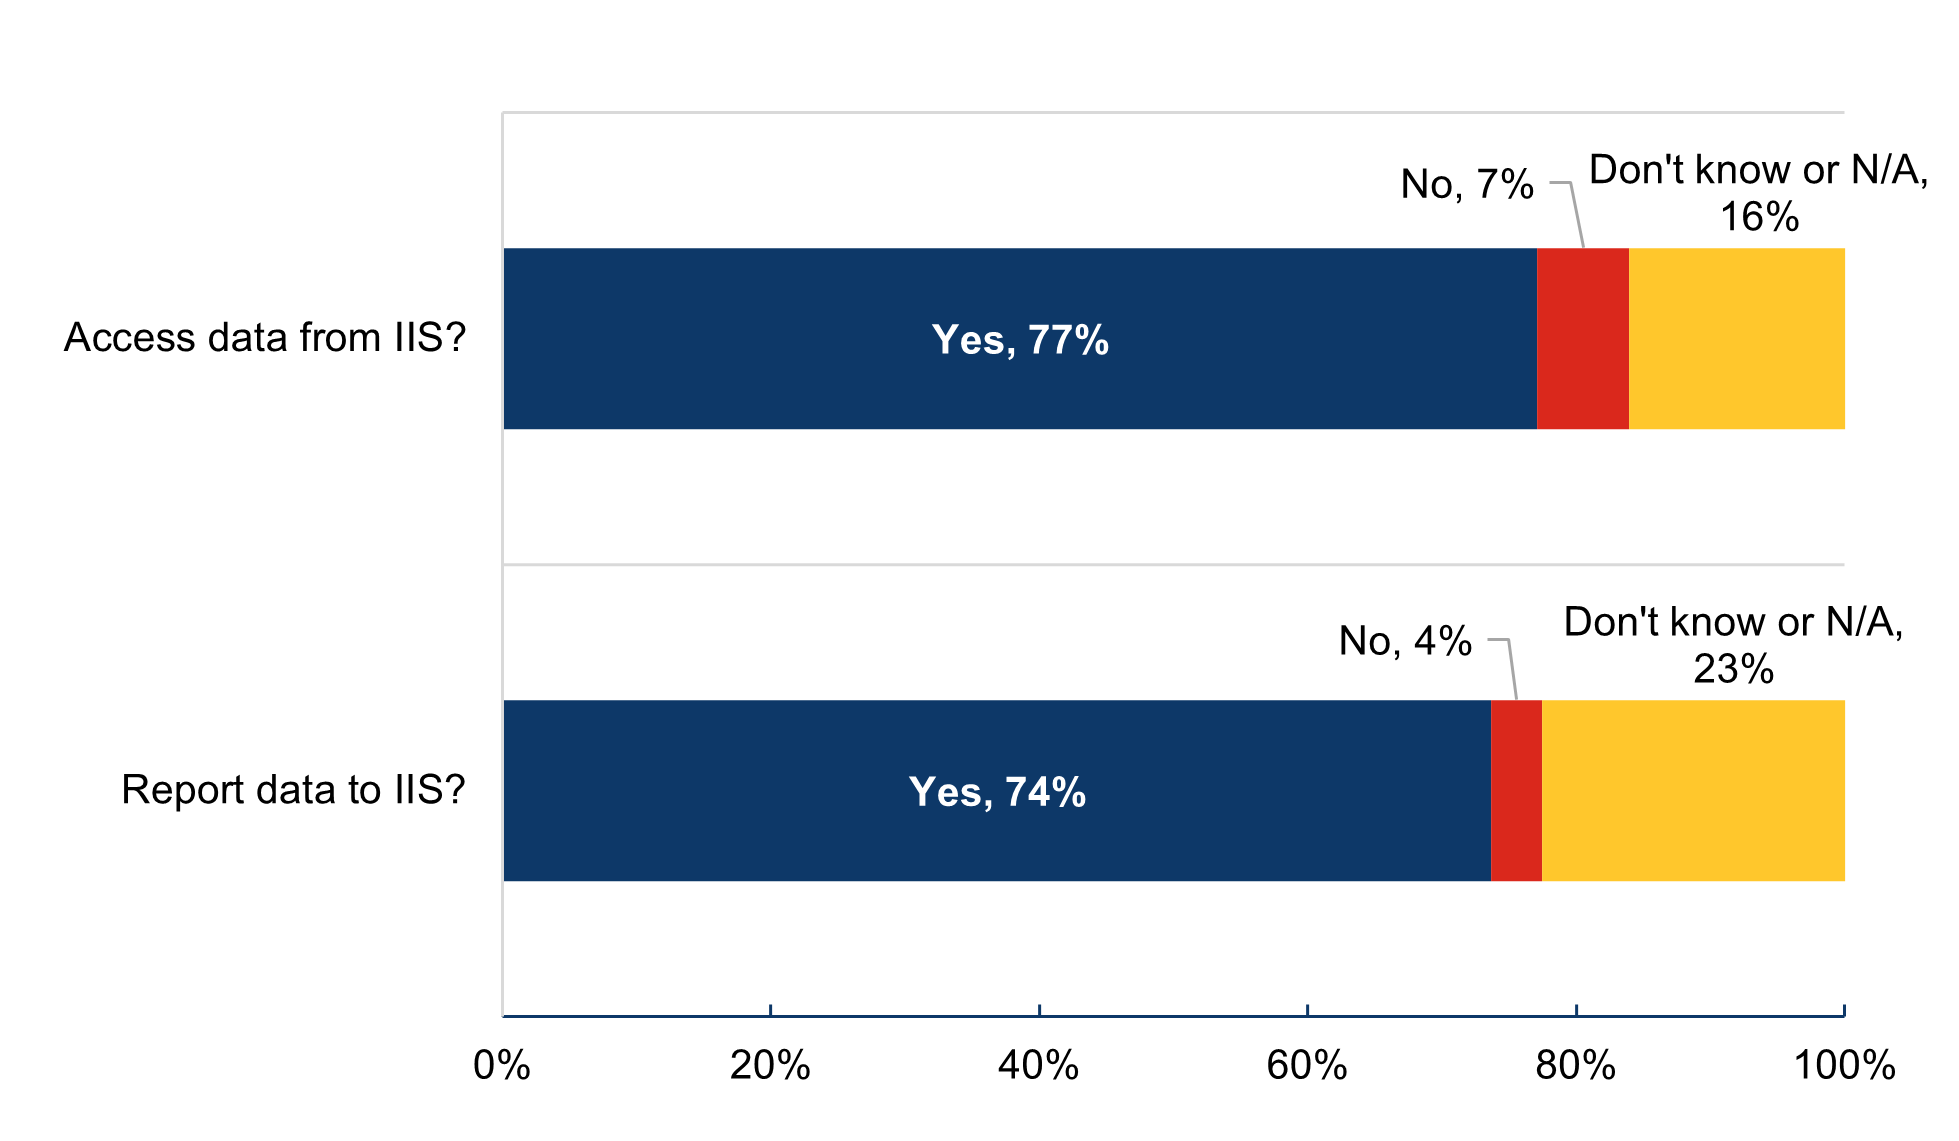 This figure contains a stacked horizontal bar chart that displays the percentage of physicians that are aware of their EHR’s capabilities to access data from or report data to their state’s IIS. The x-axis shows a range of percentages from 0% to 100%, and the y-axis displays two categories of EHR capabilities, including “Access data from IIS?” and “Report data to IIS?”. The stacked bars display the percentage of primary care physicians who indicate “Yes”, “No”, and “Don’t know or N/A” to each of the categories of EHR capabilities. The chart shows that for the category “Access data from IIS?”, 77% of primary care physicians indicated “Yes”, 7% responded “No”, and the remaining 16% indicated “Don’t know or N/A.” For “Report data to IIS?”, 74% of primary care physicians responded with “Yes”, 4% reported “No”, and the remaining 23% indicated “Don’t know or N/A.”